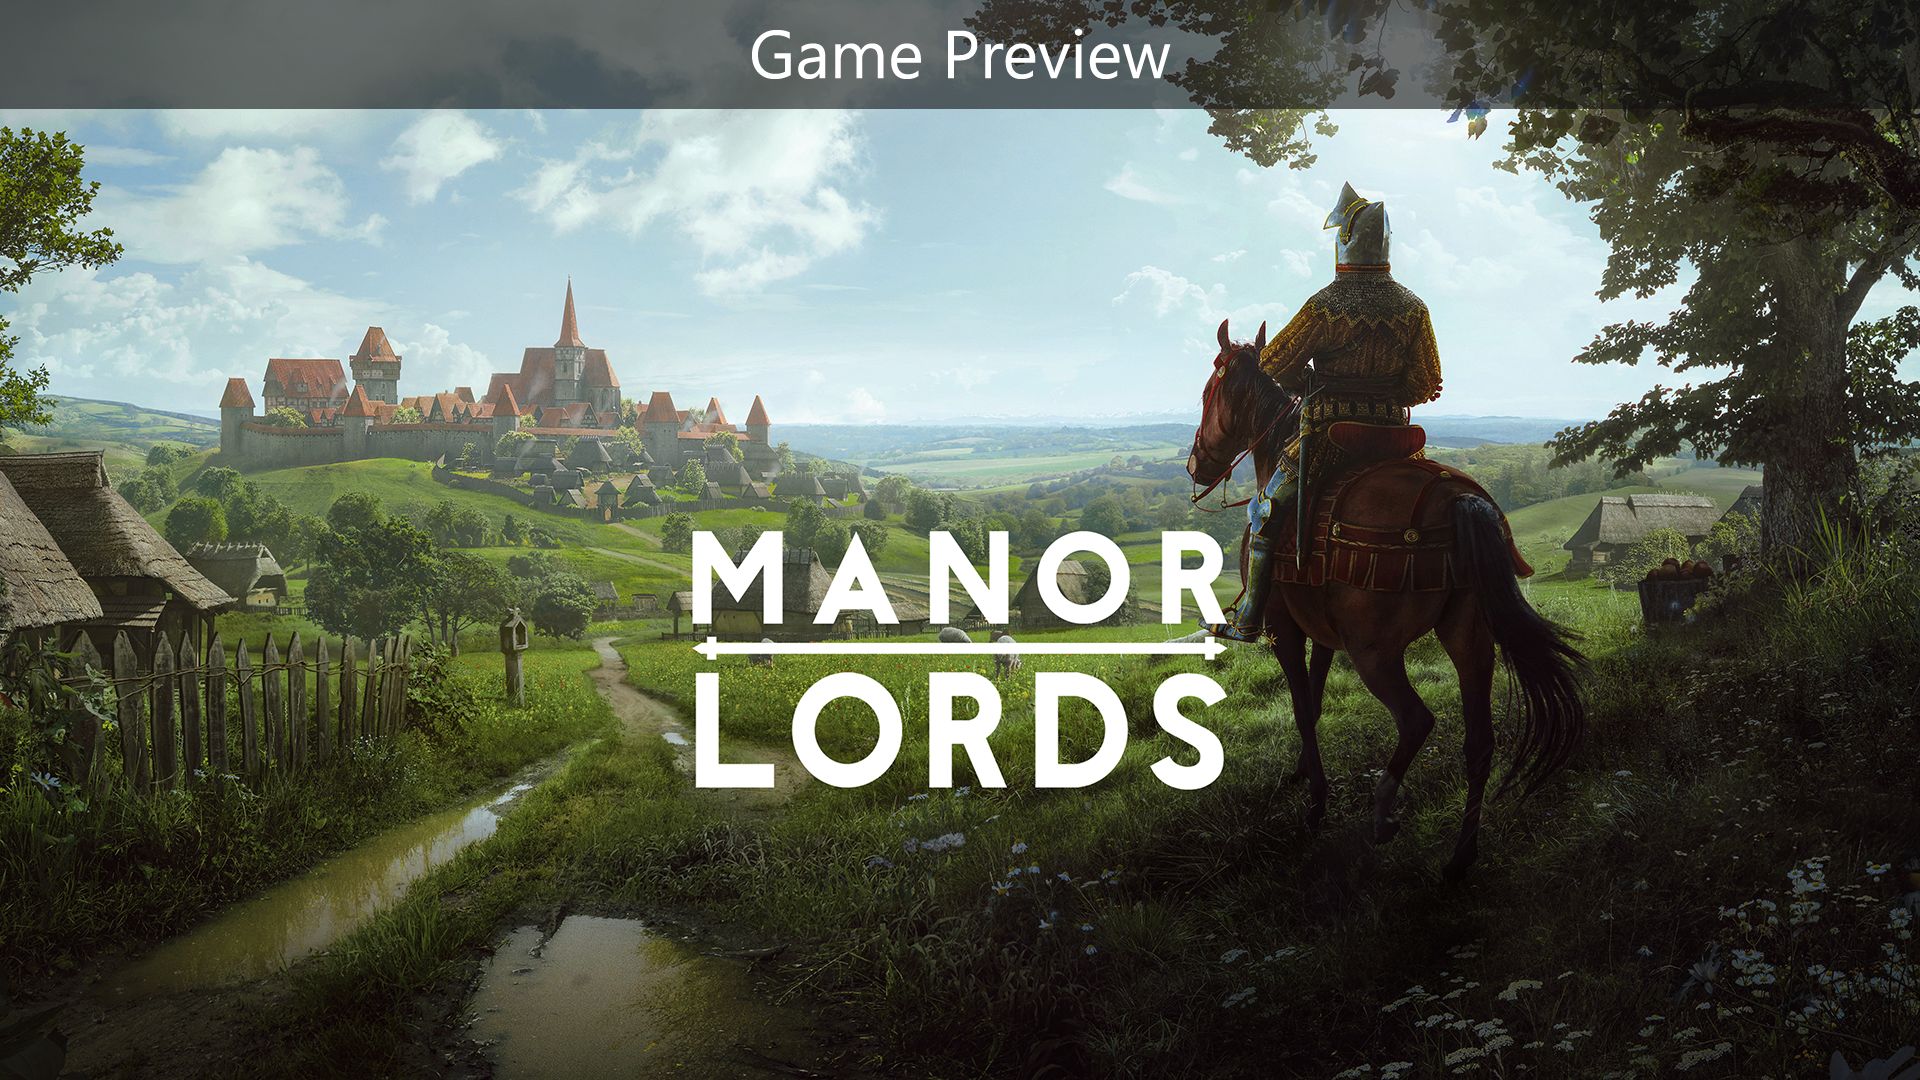 Manor-Lords-Key-Art-Game-Preview-1a0a190d580d84dcc346.jpg